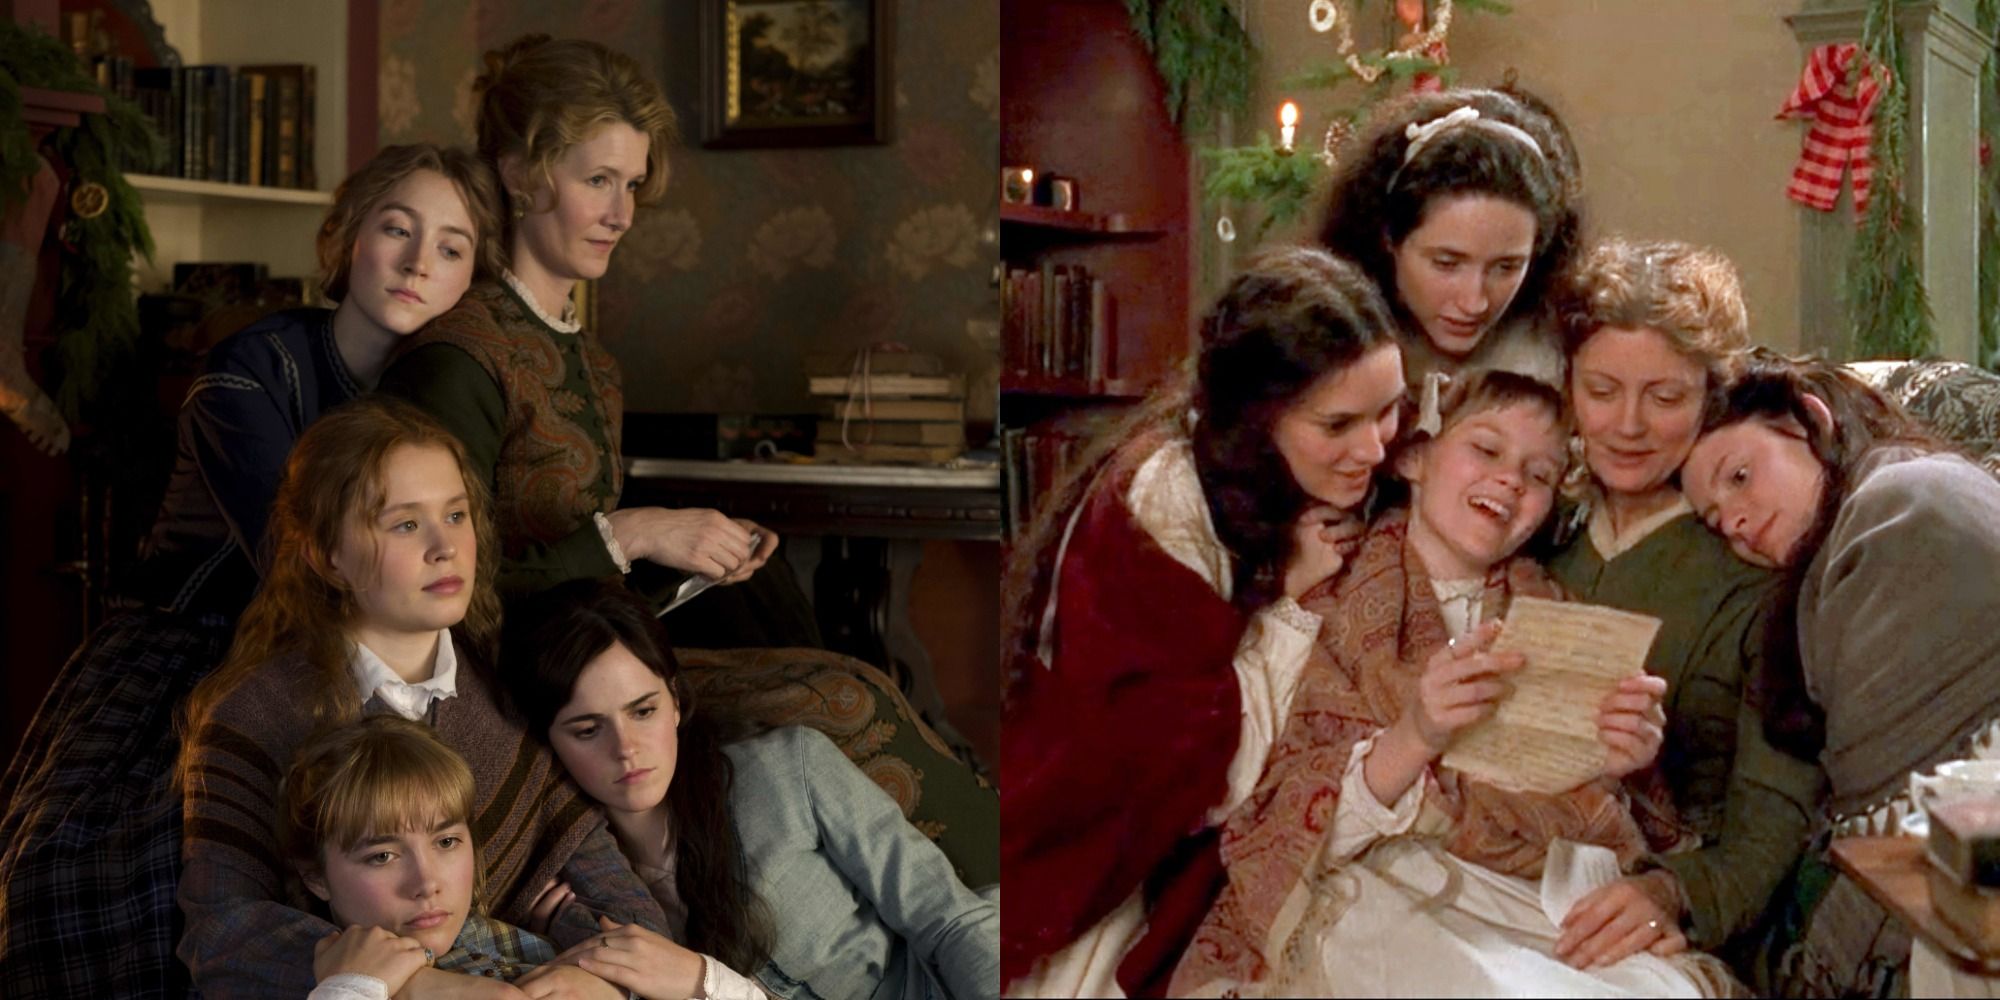 Split image showing the main characters from Little Women 2019 and 1994